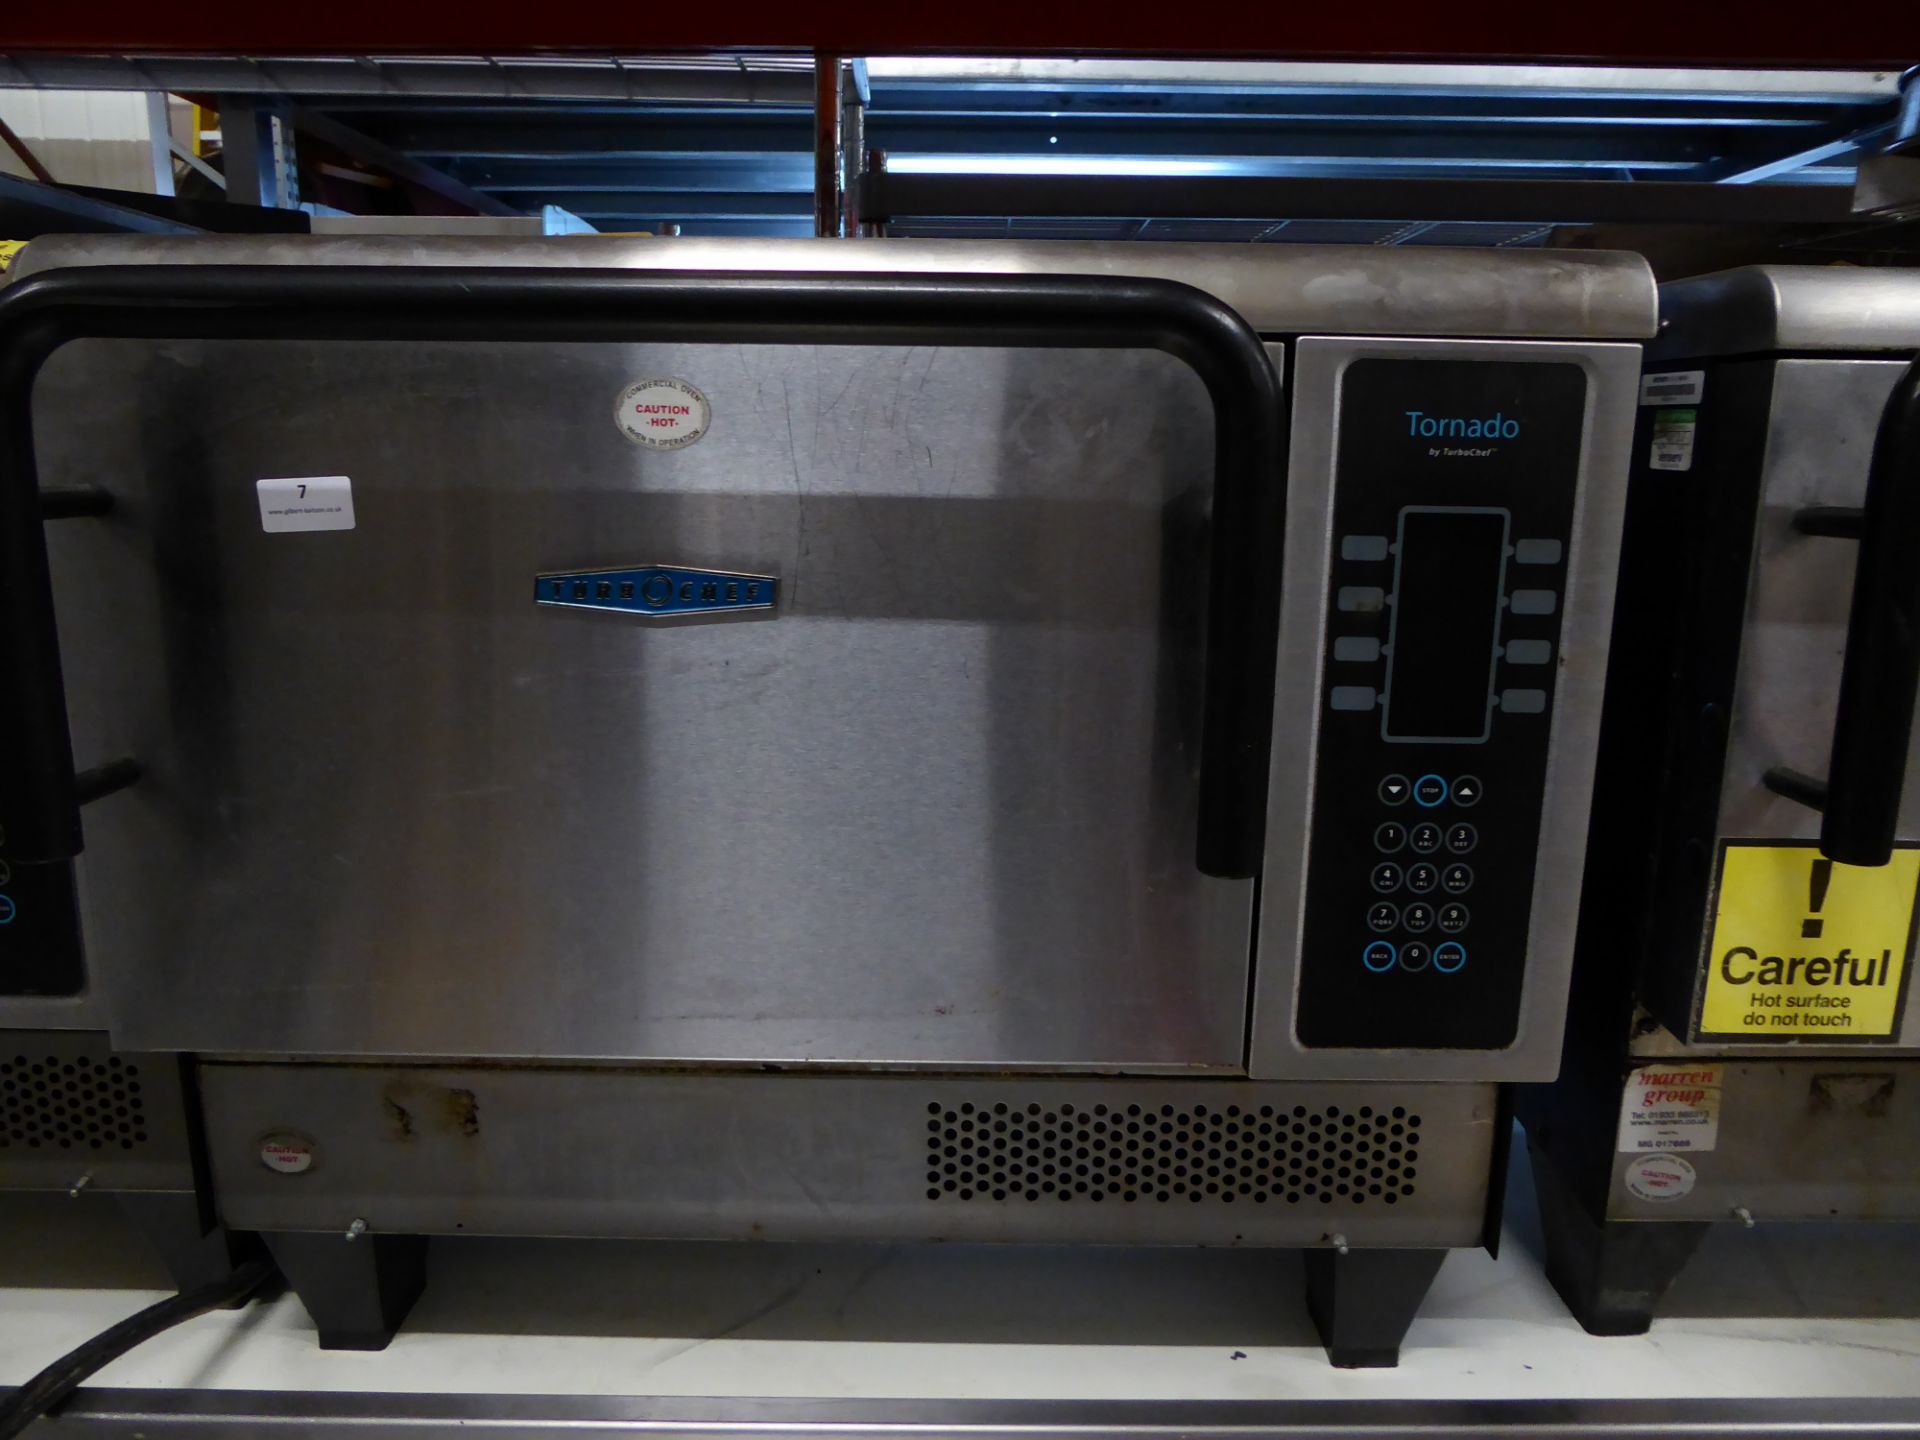 * Turbchef Tornado high speed oven RRP £9000